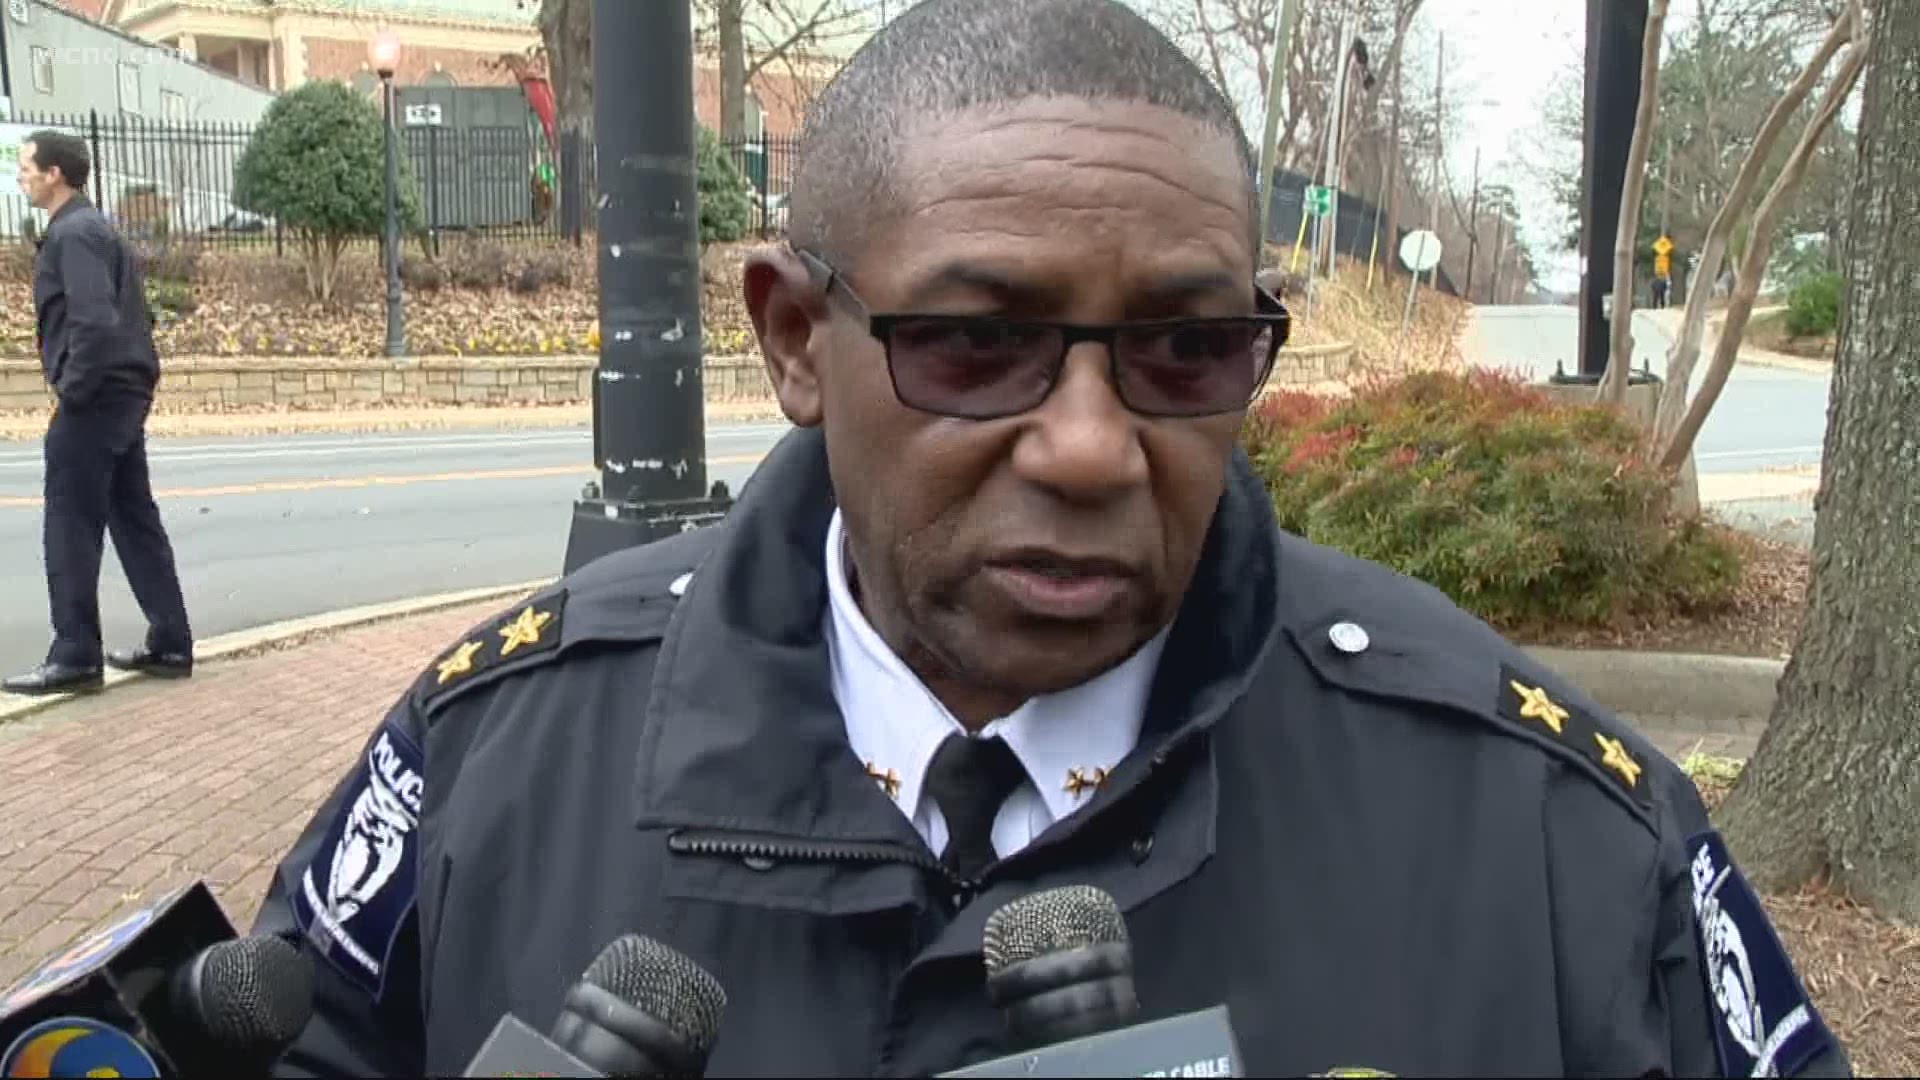 Rodney Monroe became Charlotte's first Black police chief in 2008. He retired in 2015 after leading the force during a period of crime reduction.